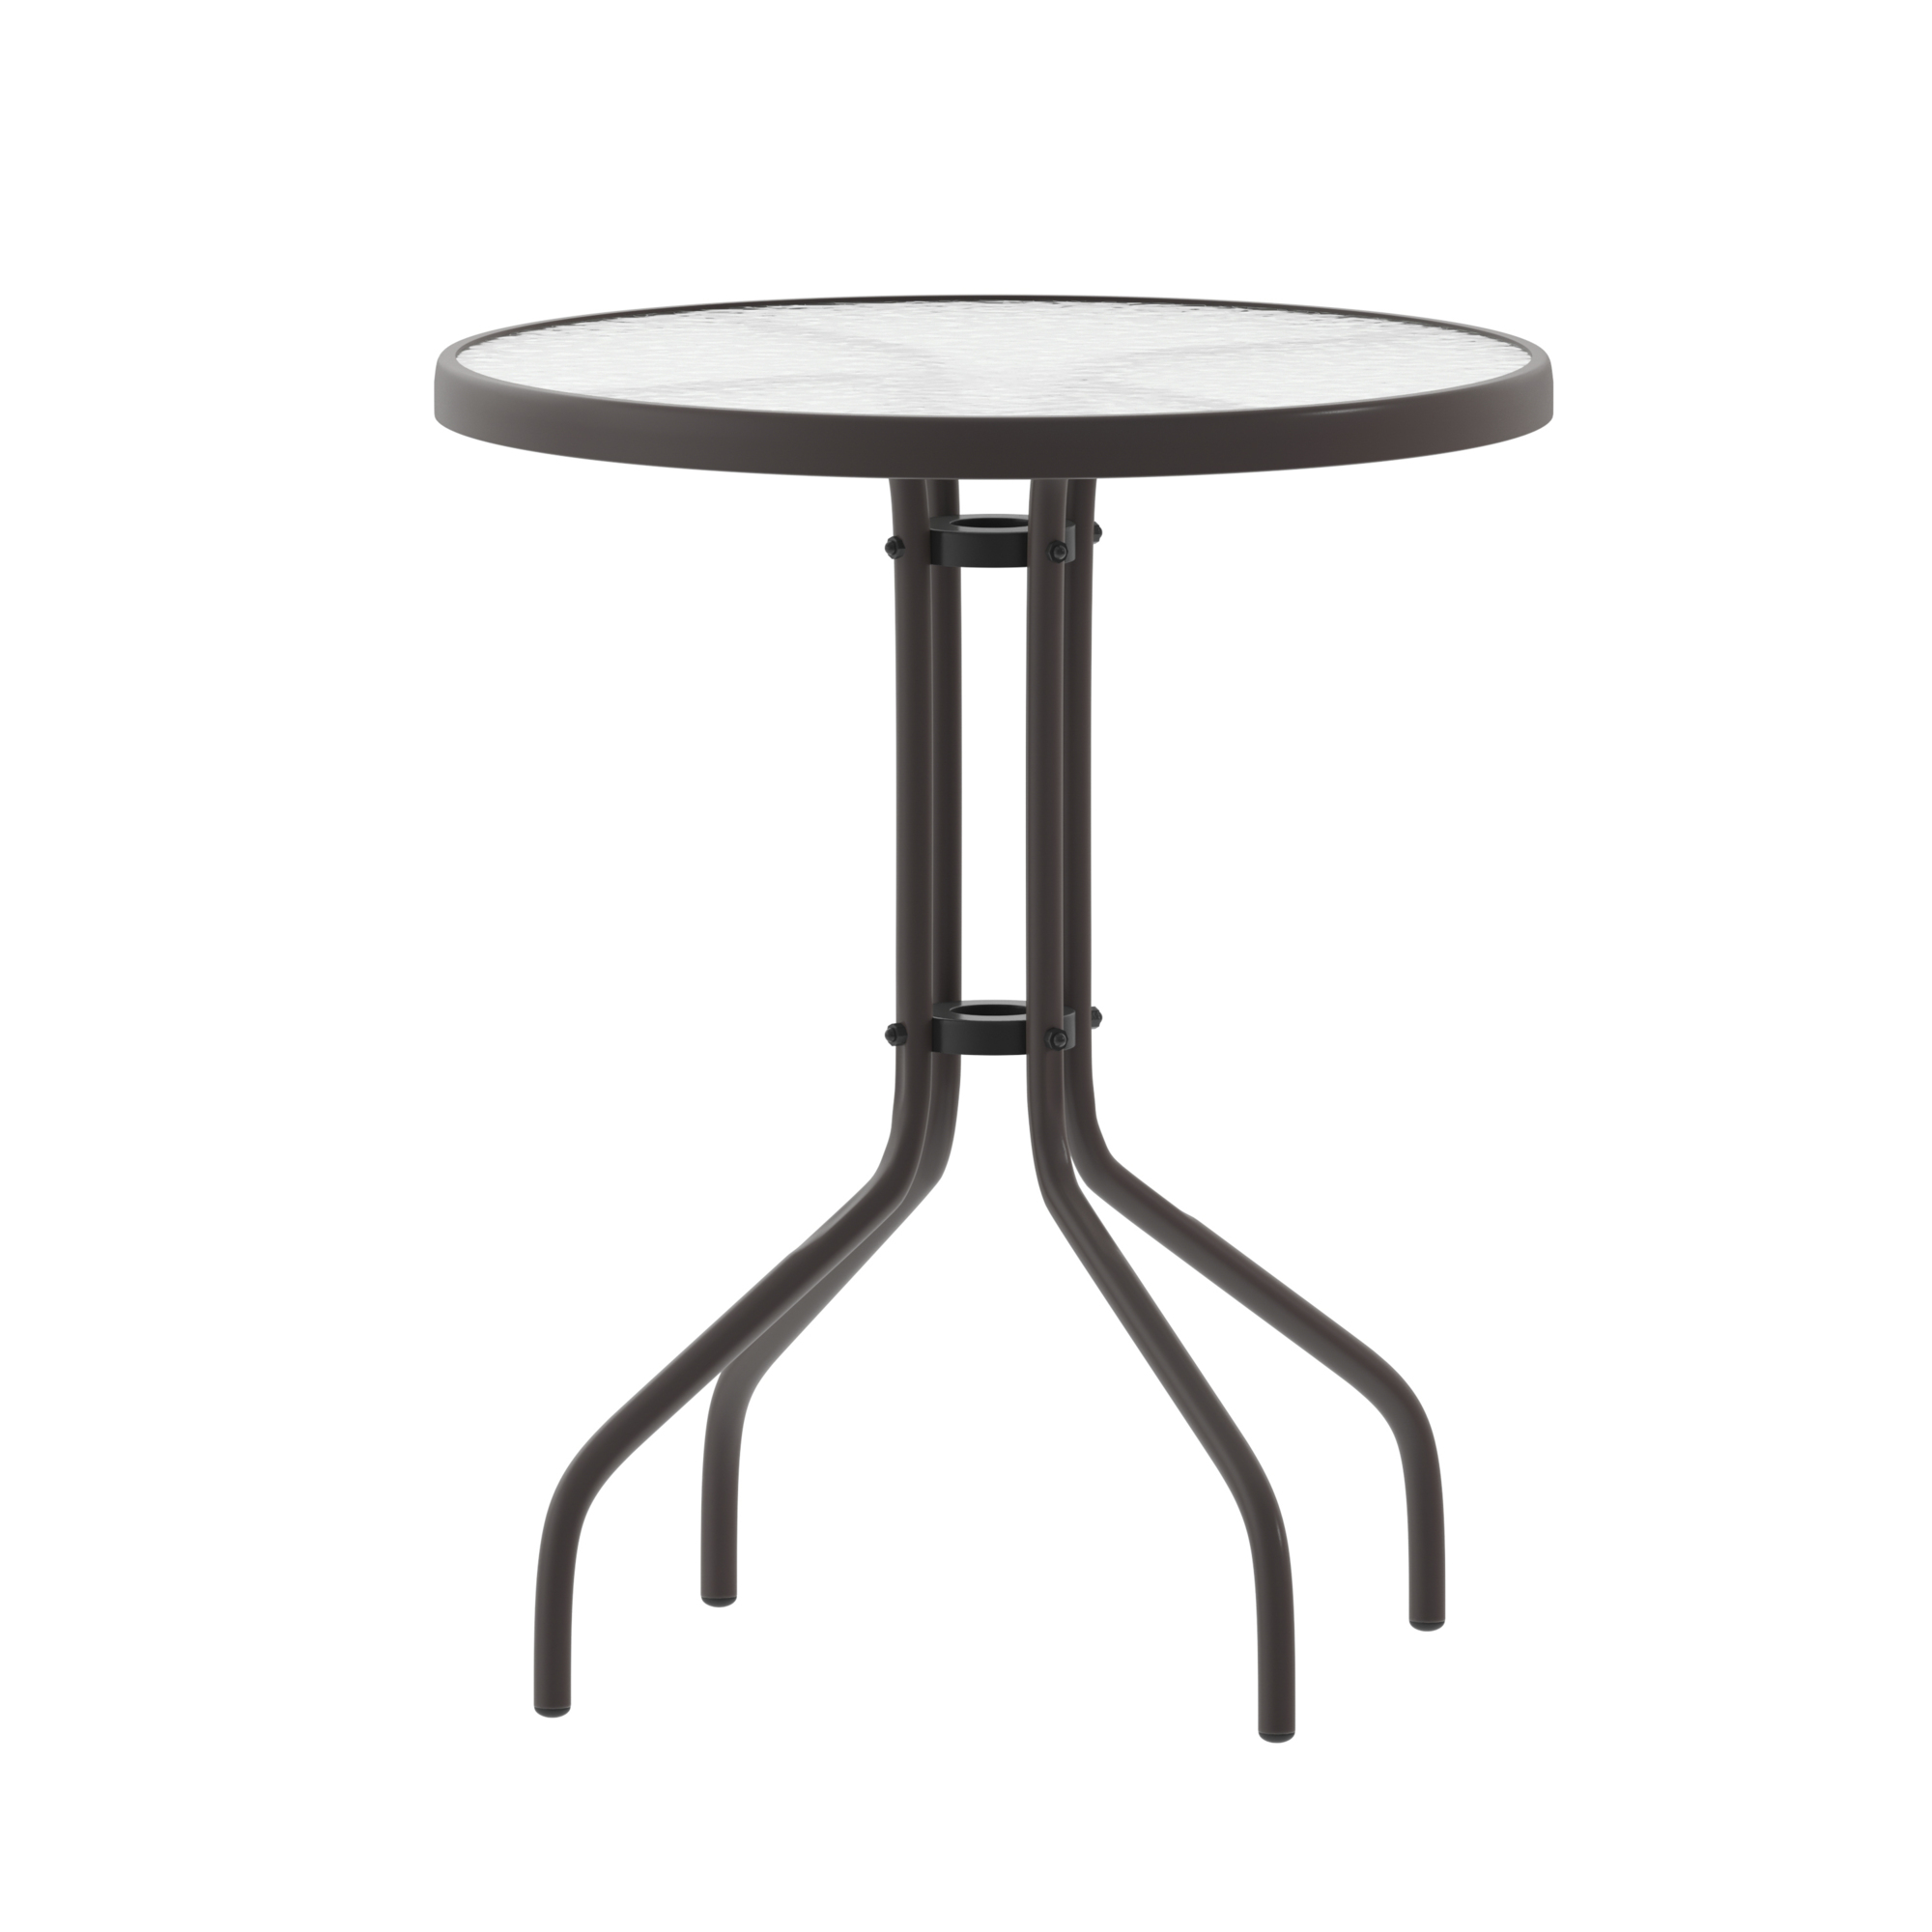 Flash Furniture, 23.75Inch Bronze Round Tempered Glass Metal Table, Table Shape Round, Primary Color Brown, Height 28 in, Model TLH0701BZ